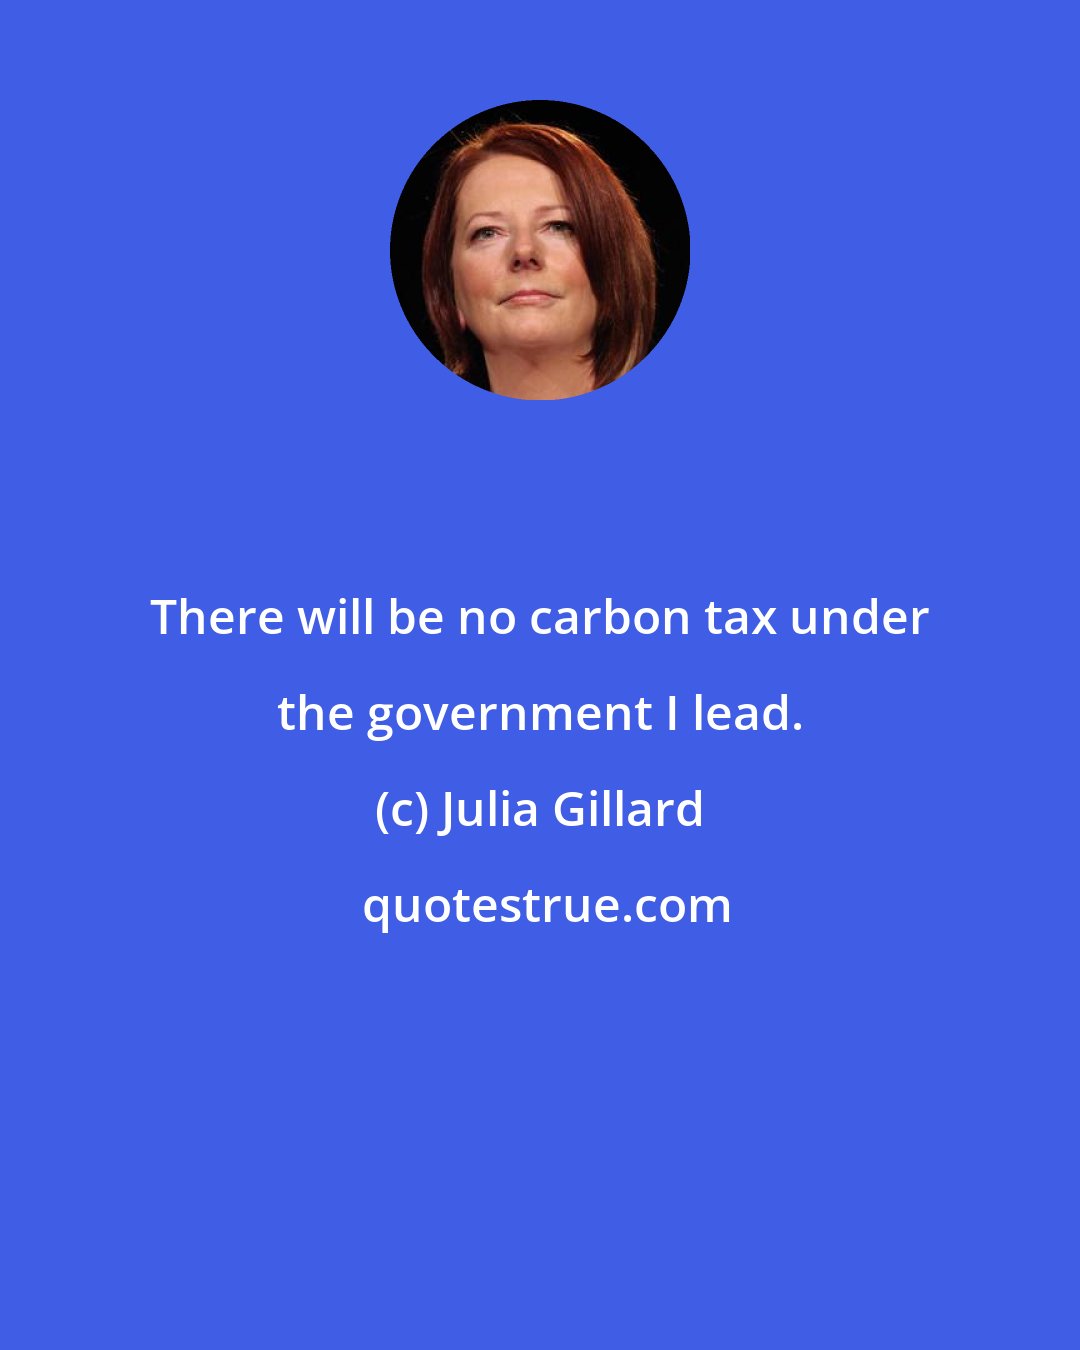 Julia Gillard: There will be no carbon tax under the government I lead.